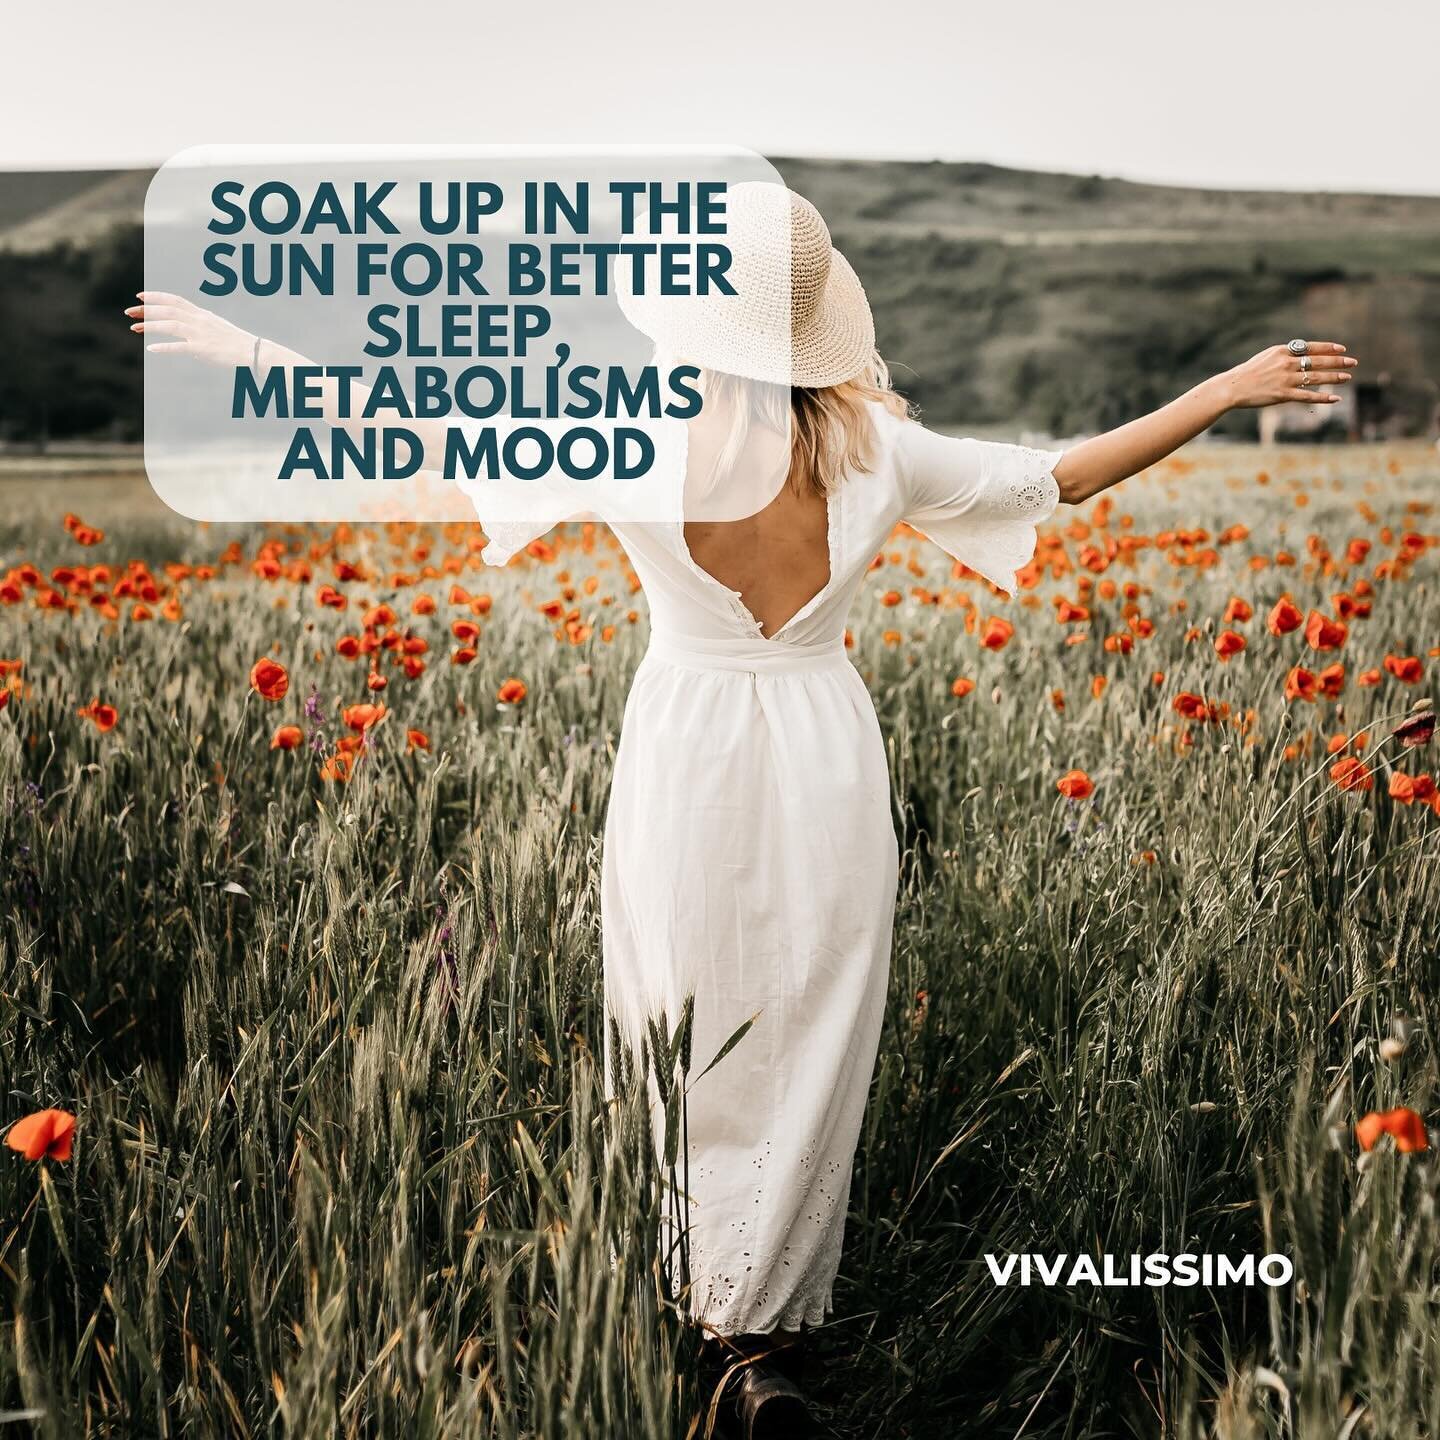 The light/dark dynamic can help reset the circadian rhythm, our body own body clock. Spending time in the sun can help adjust it when it&rsquo;s off balance. Just a few minutes of sunlight (sunscreen and hat on) can help boost mood, metabolism and mo